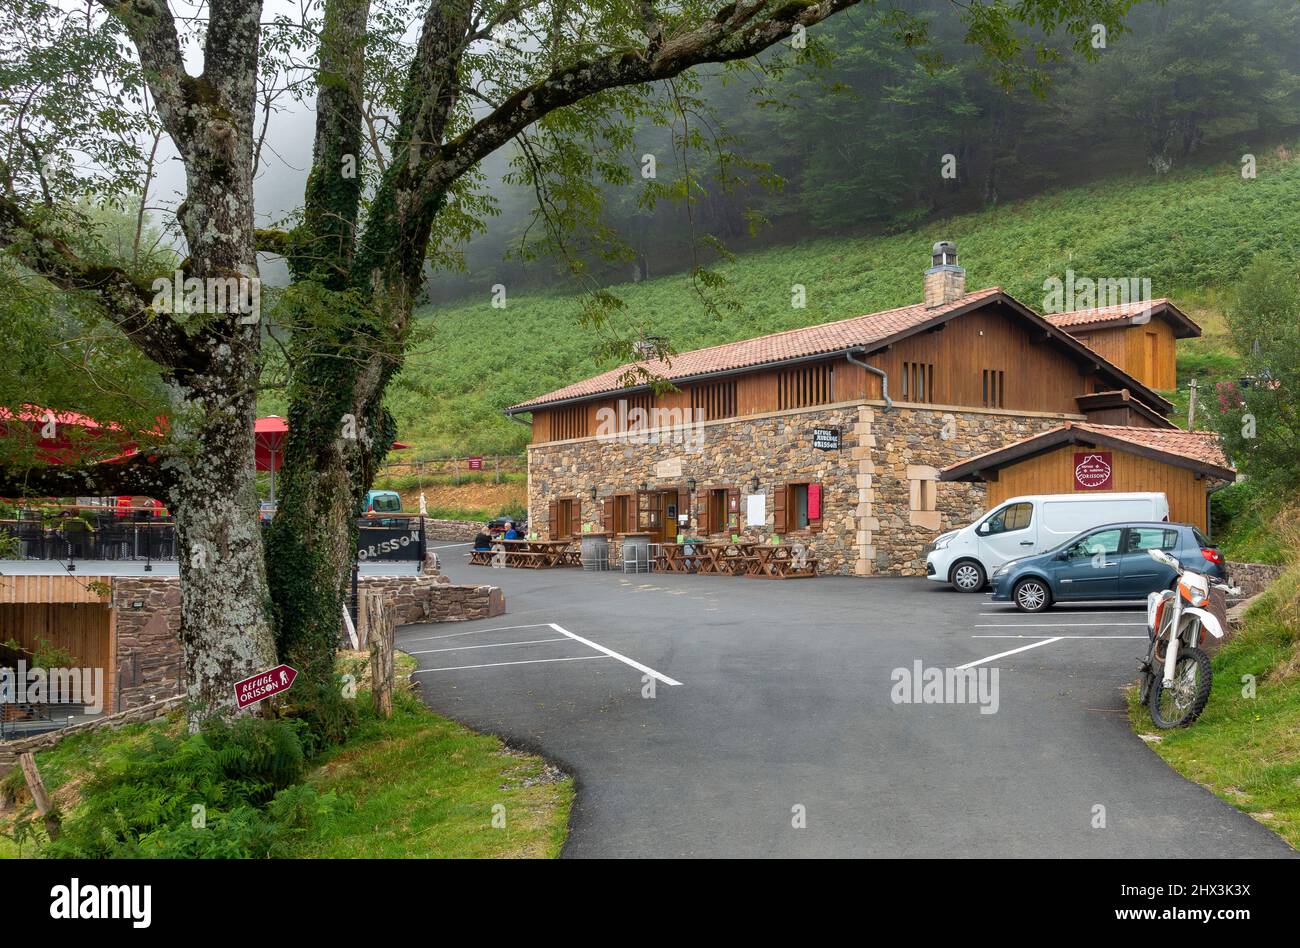 The Orisson albergue in the French Pyrenees mountains on the Camino de Santiago just outside of St Jean Pied De Port in France Stock Photo